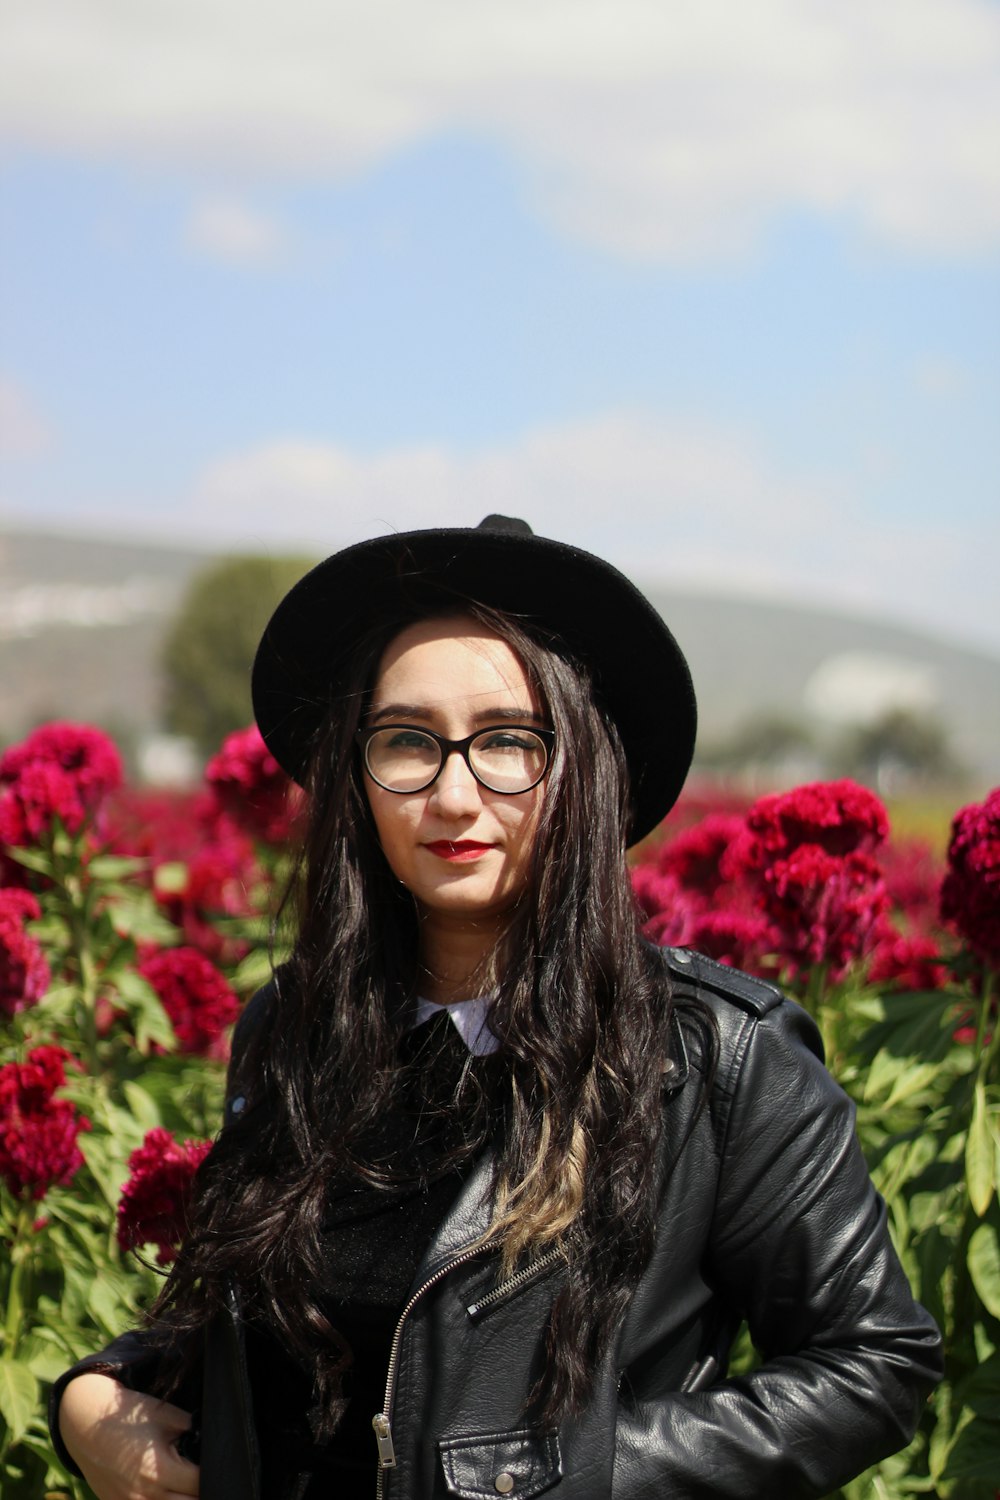 woman in black leather jacket wearing black hat standing near red flowers during daytime